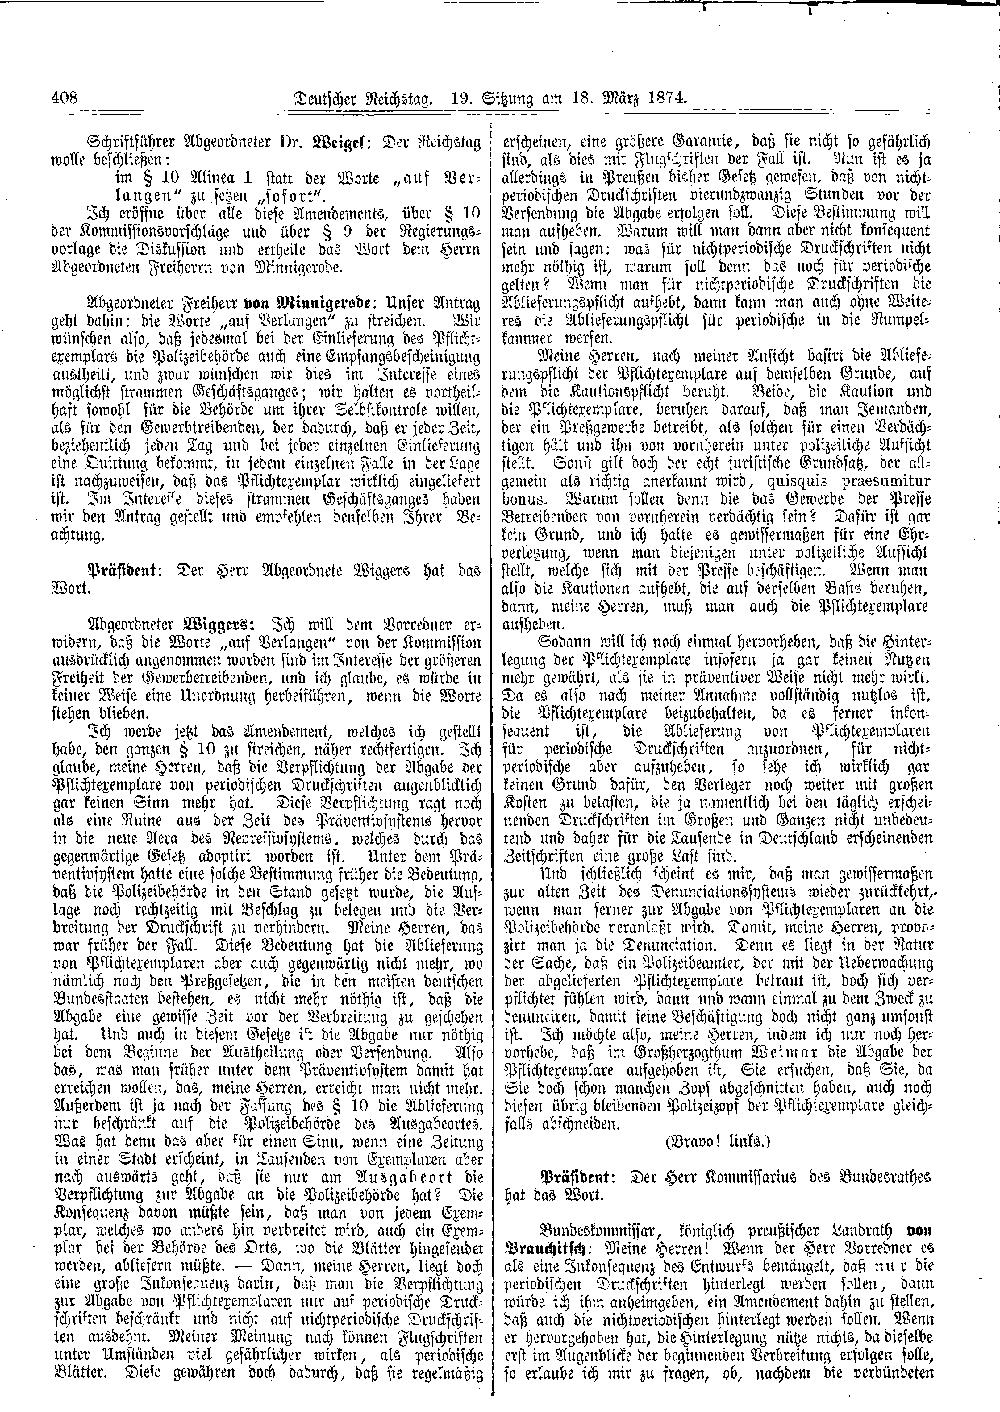 Scan of page 408